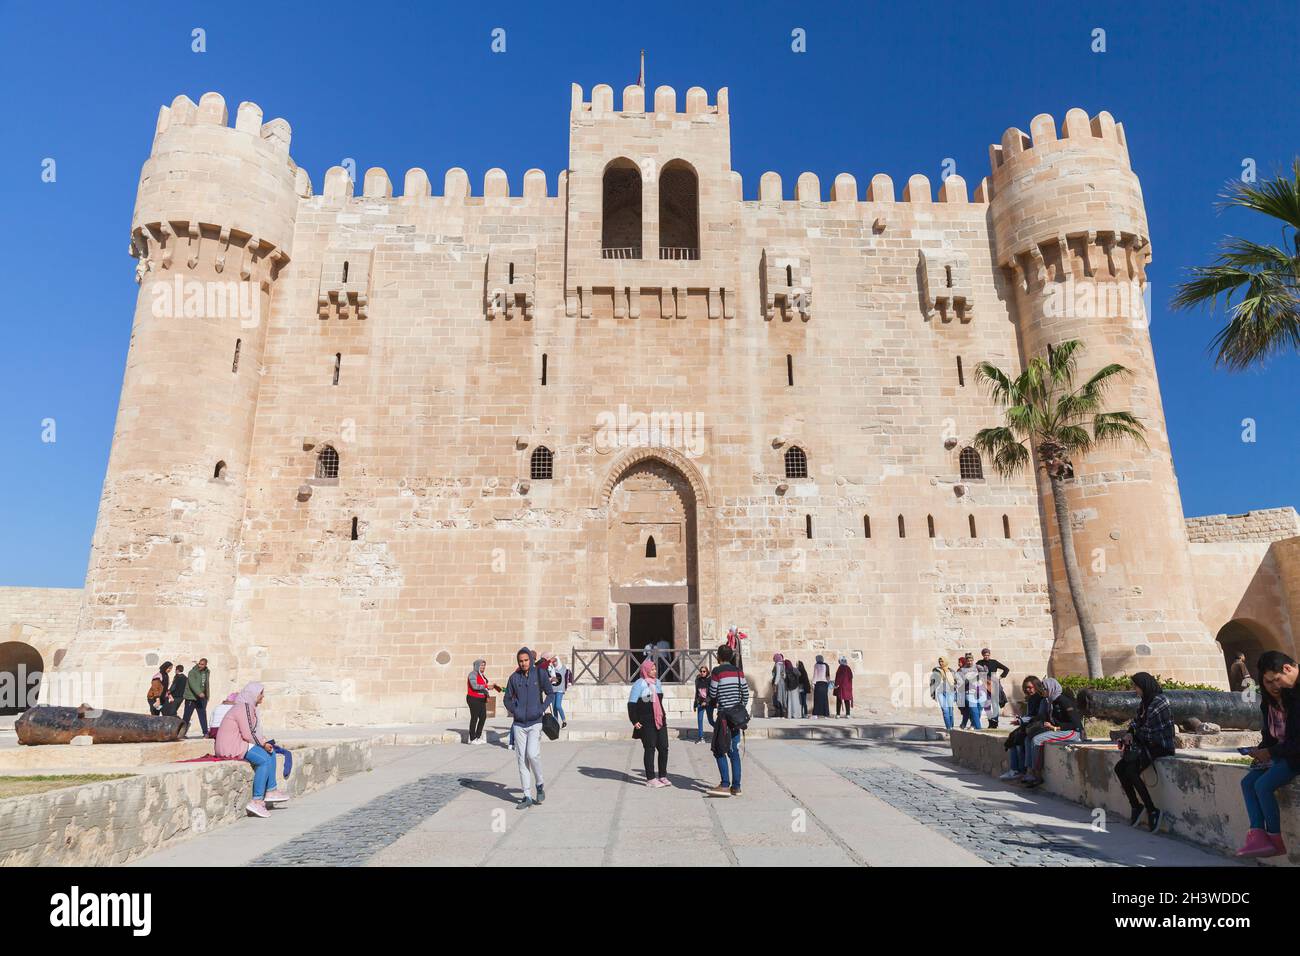 Alexandria, Egypt - December 14, 2018: Tourists walk in front of The Citadel of Qaitbay or the Fort of Qaitbay. It is a 15th-century defensive fortres Stock Photo